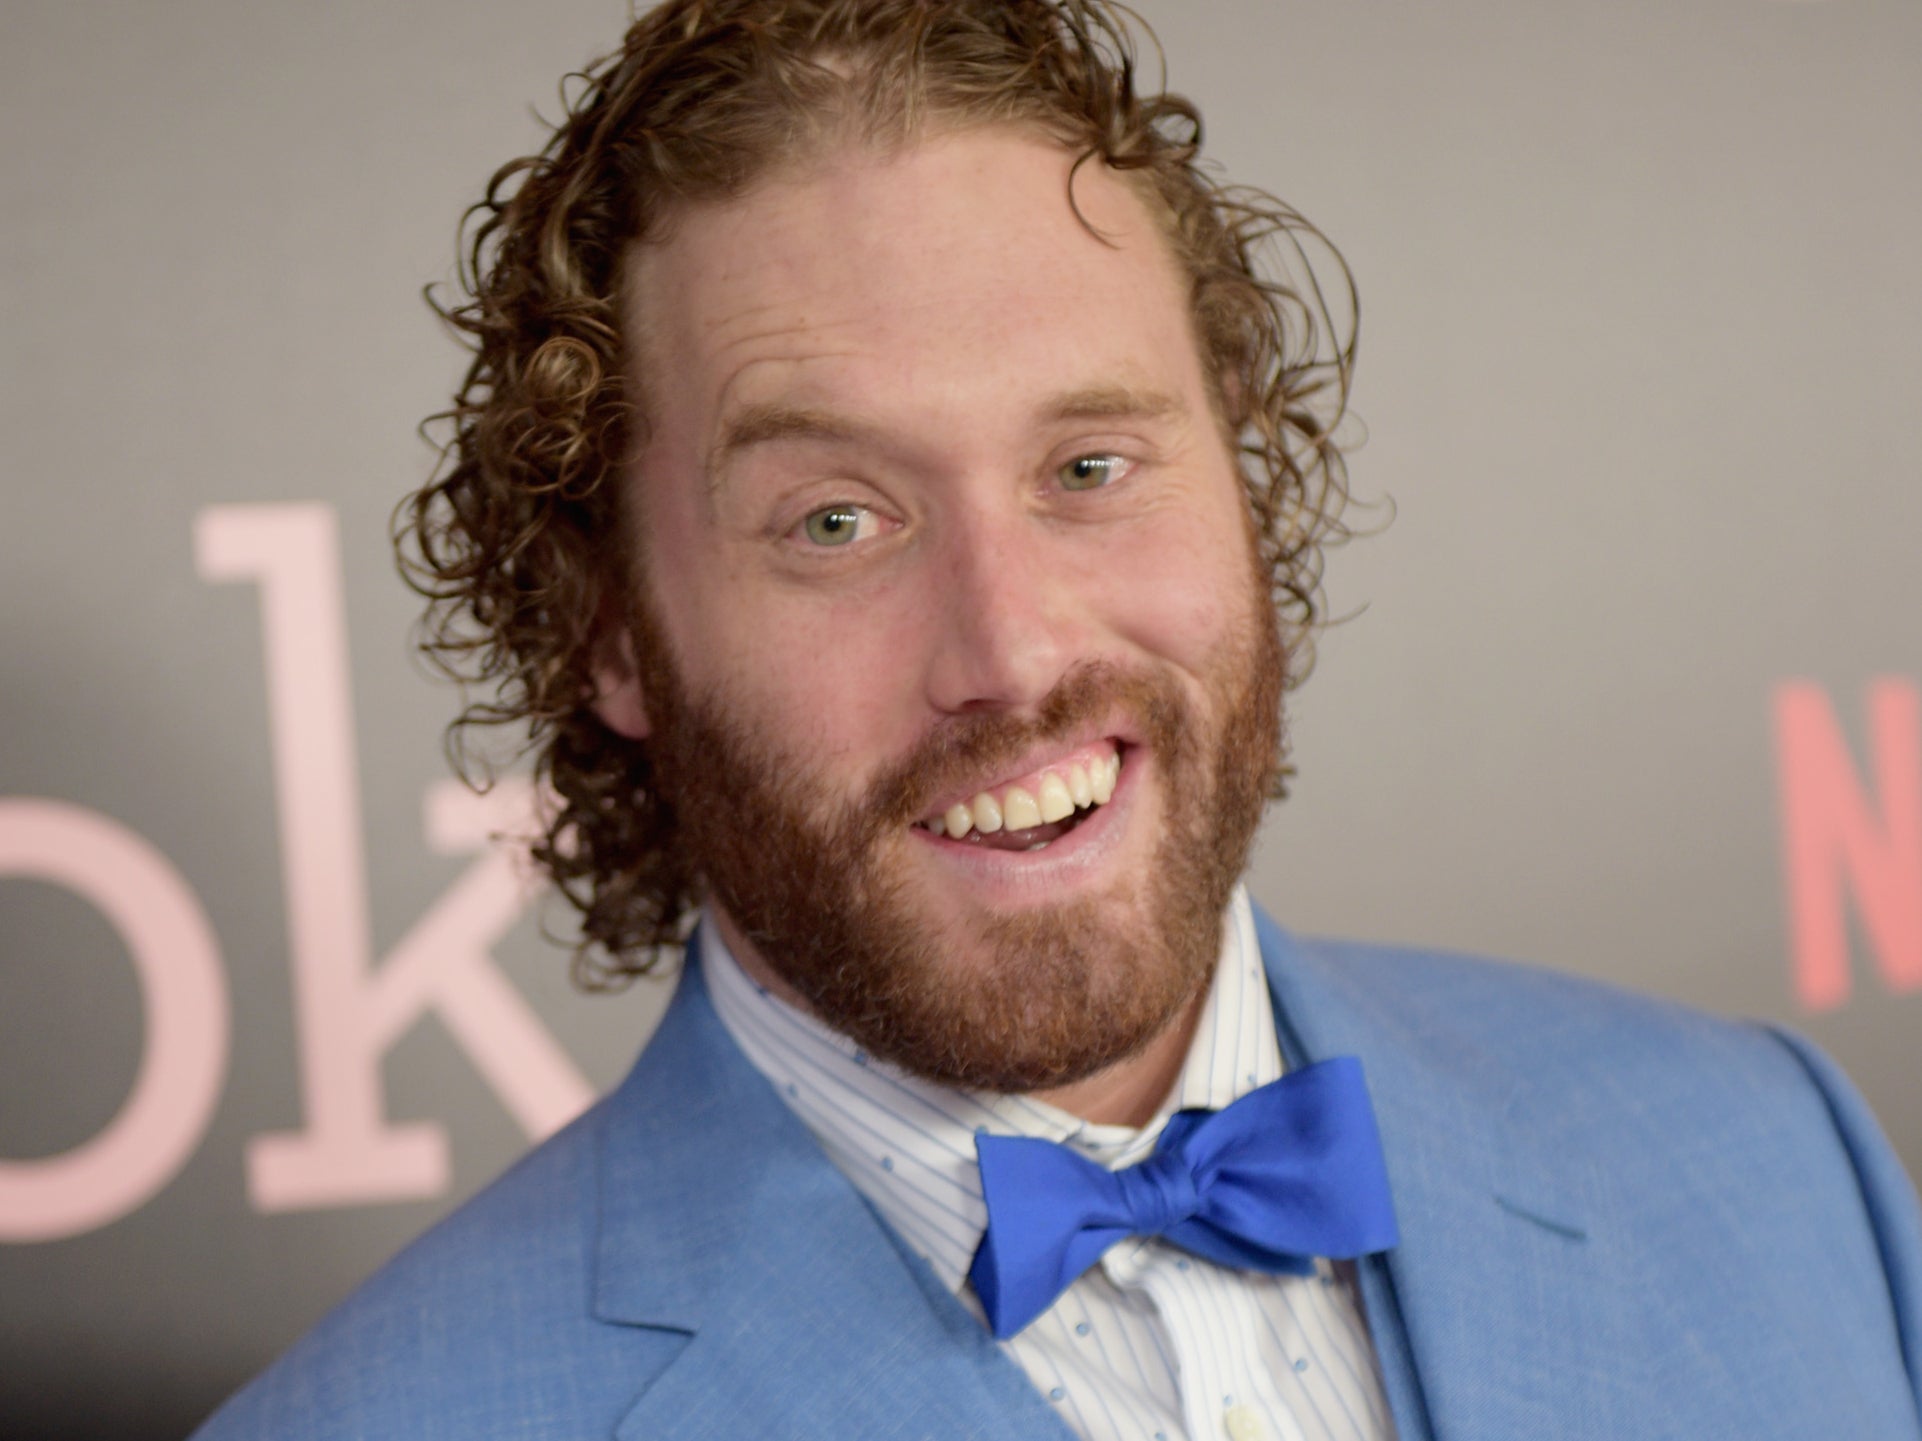 TJ Miller: Ryan Reynolds and Deadpool actor TJ Miller hash out differences  after 'uneasy relationship', read reports - The Economic Times